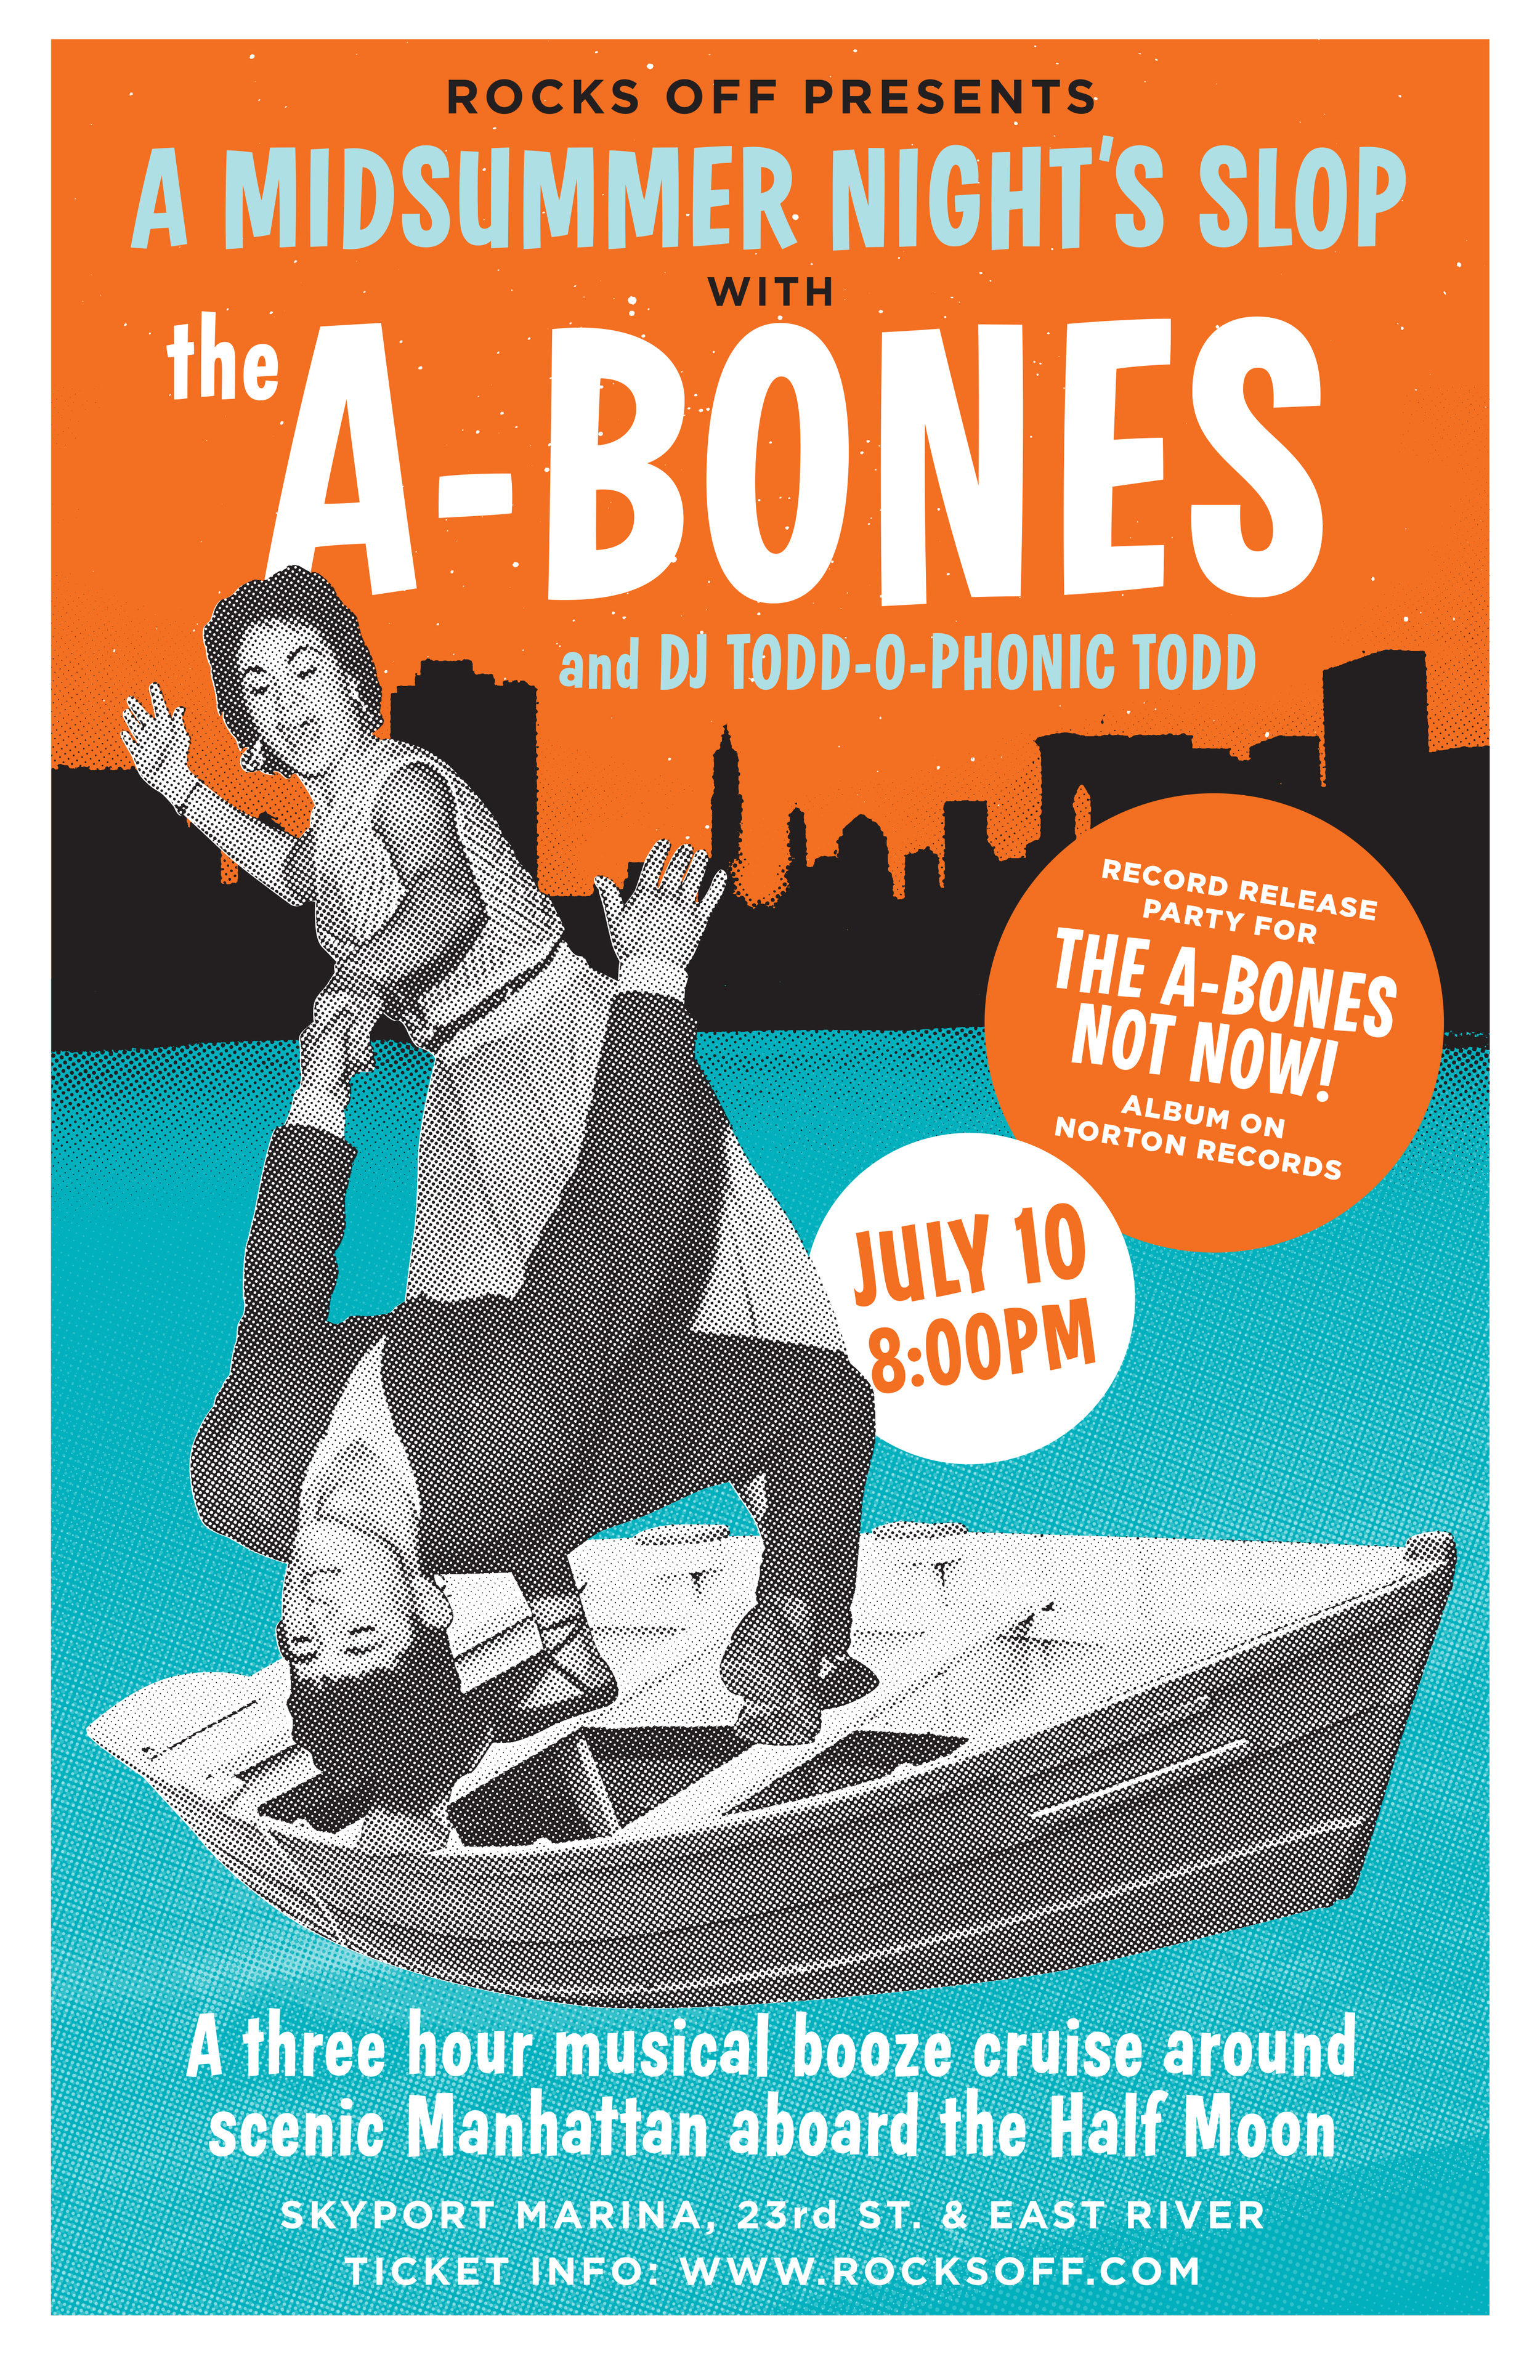 The A-Bones boat cruise poster